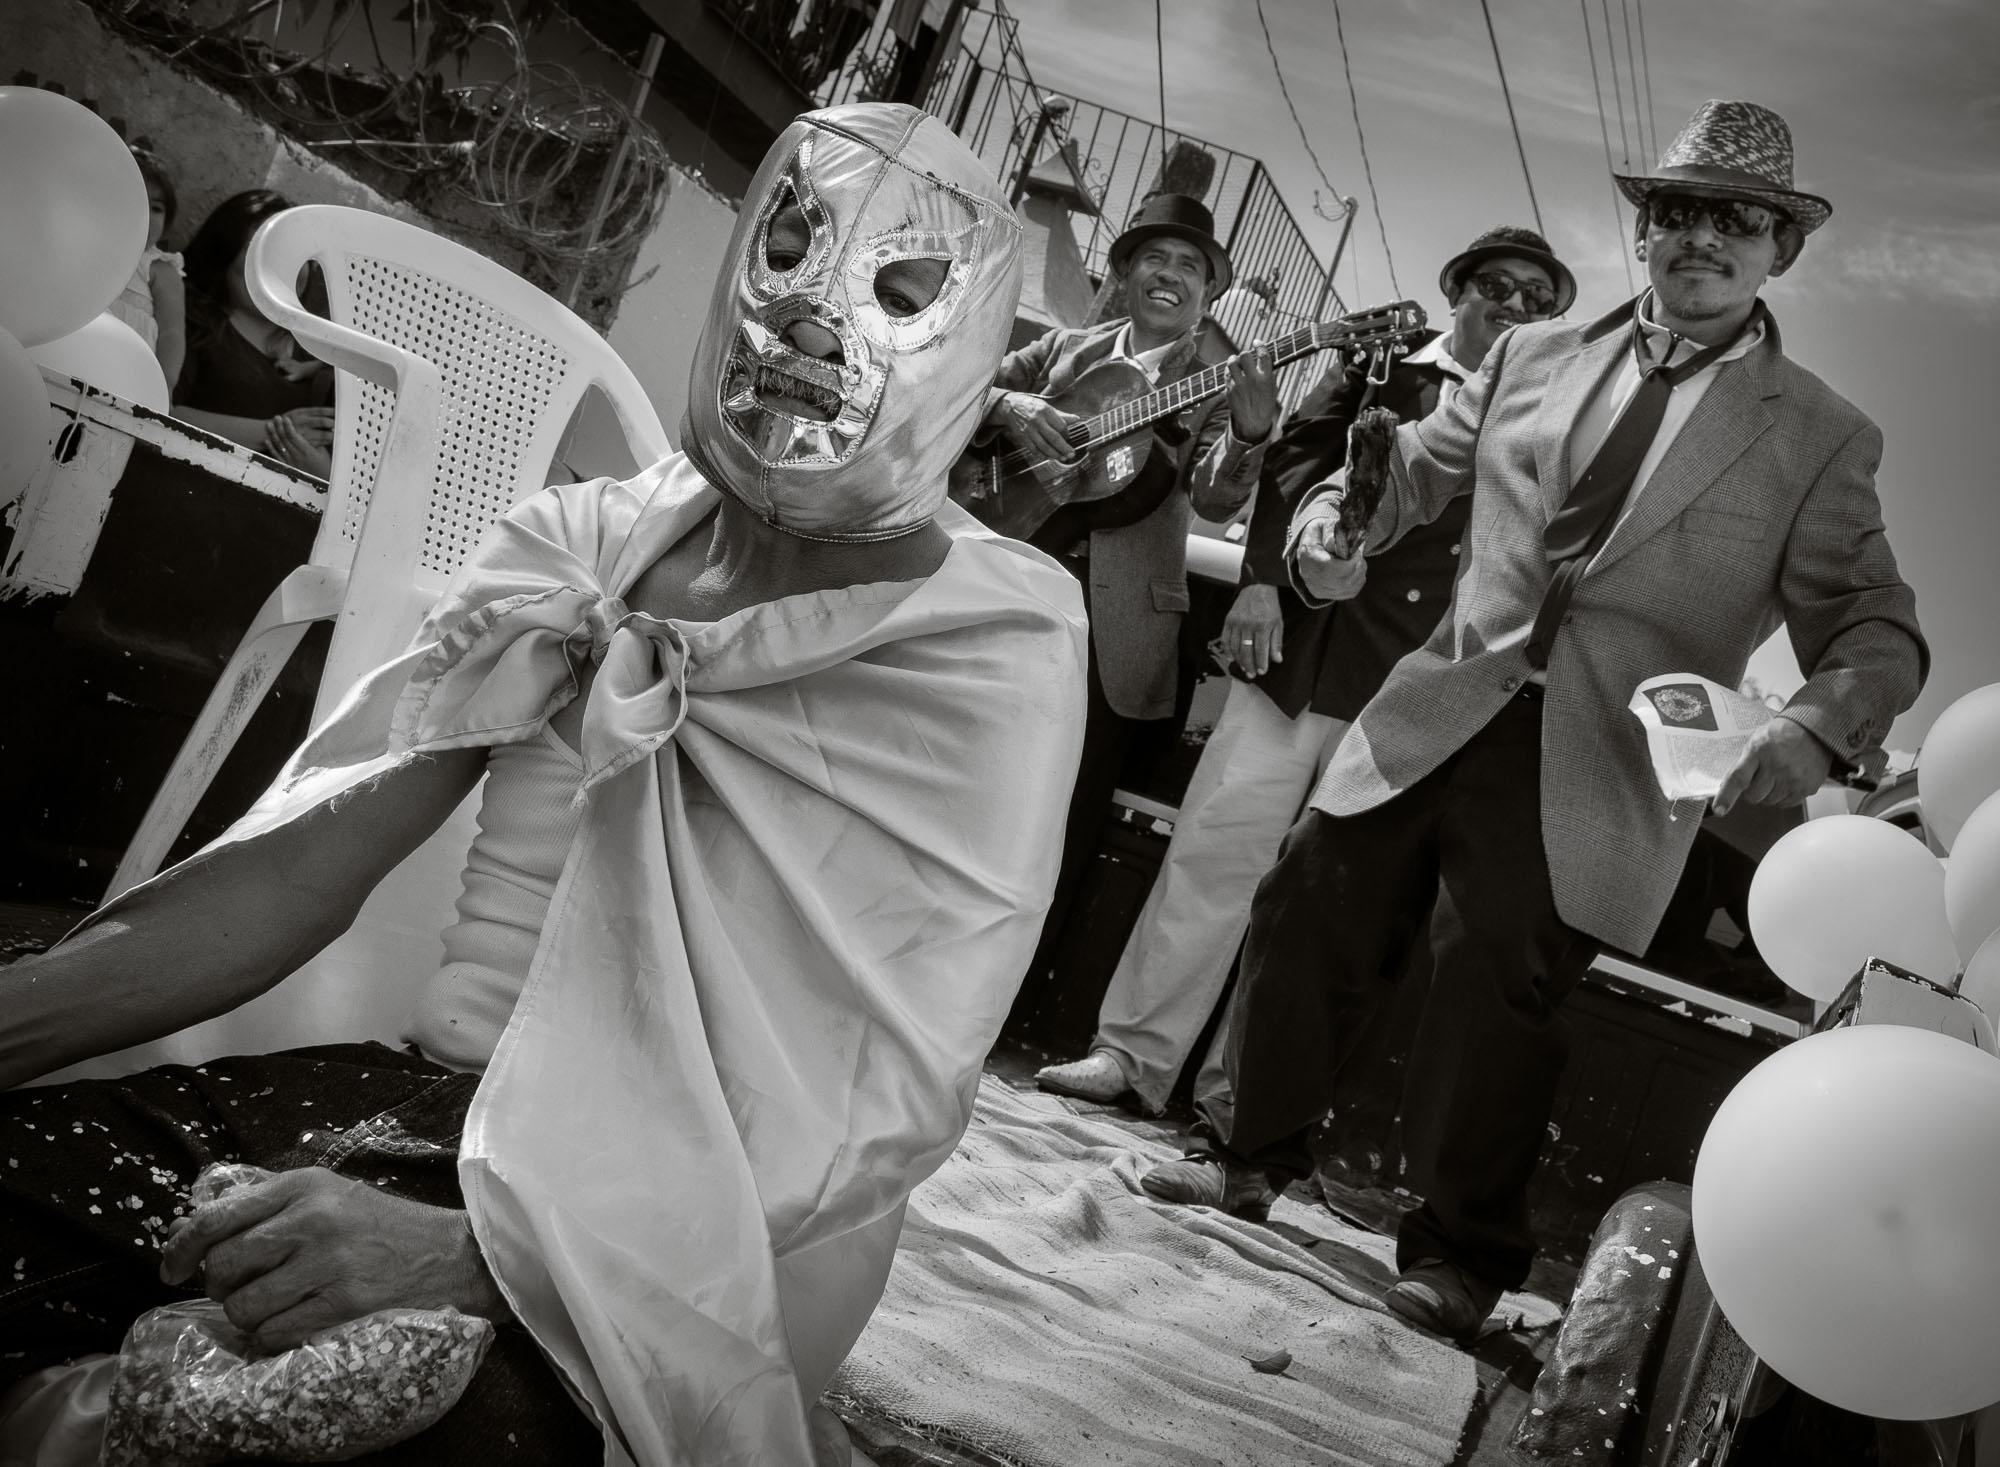 A man wearing a Mexican lucha libre mask sits on the tailgate of a truck as musicians play along to pre-recorded hip hop music during the 2015 New Year's Day Parade in Ajijic, Jalisco, Mexico